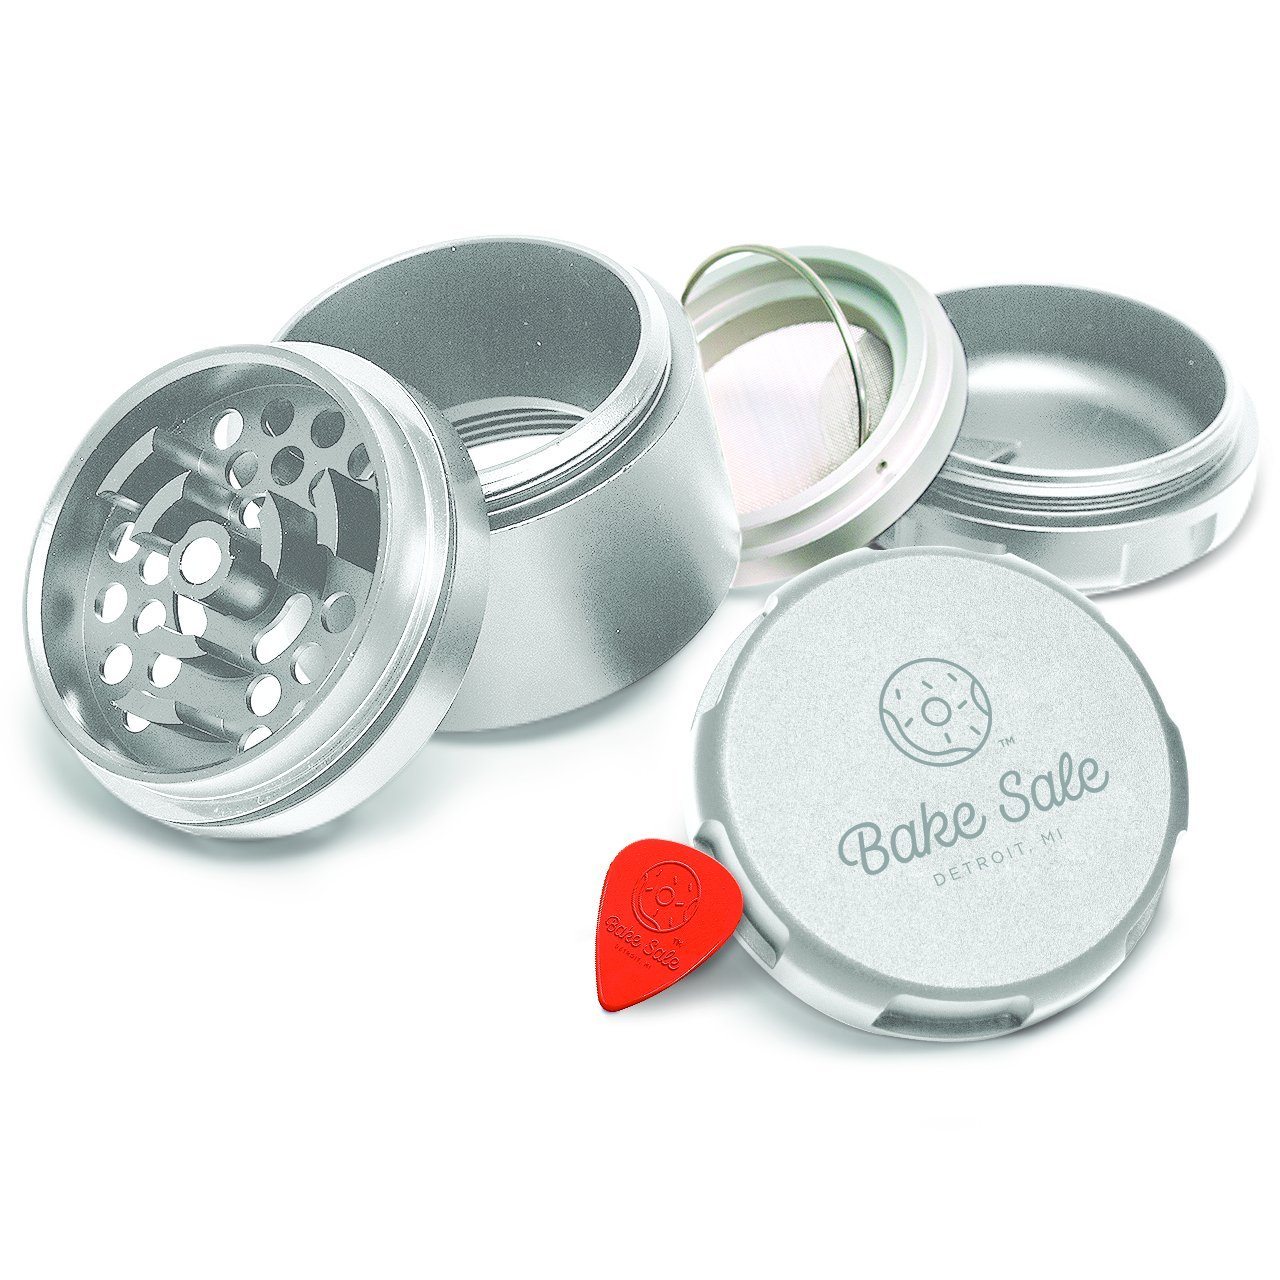 Bake Sale Aircraft Grade Aluminum Grinder W/Removable Magnetic Screen Various Colors Flower Power Packages Silver 